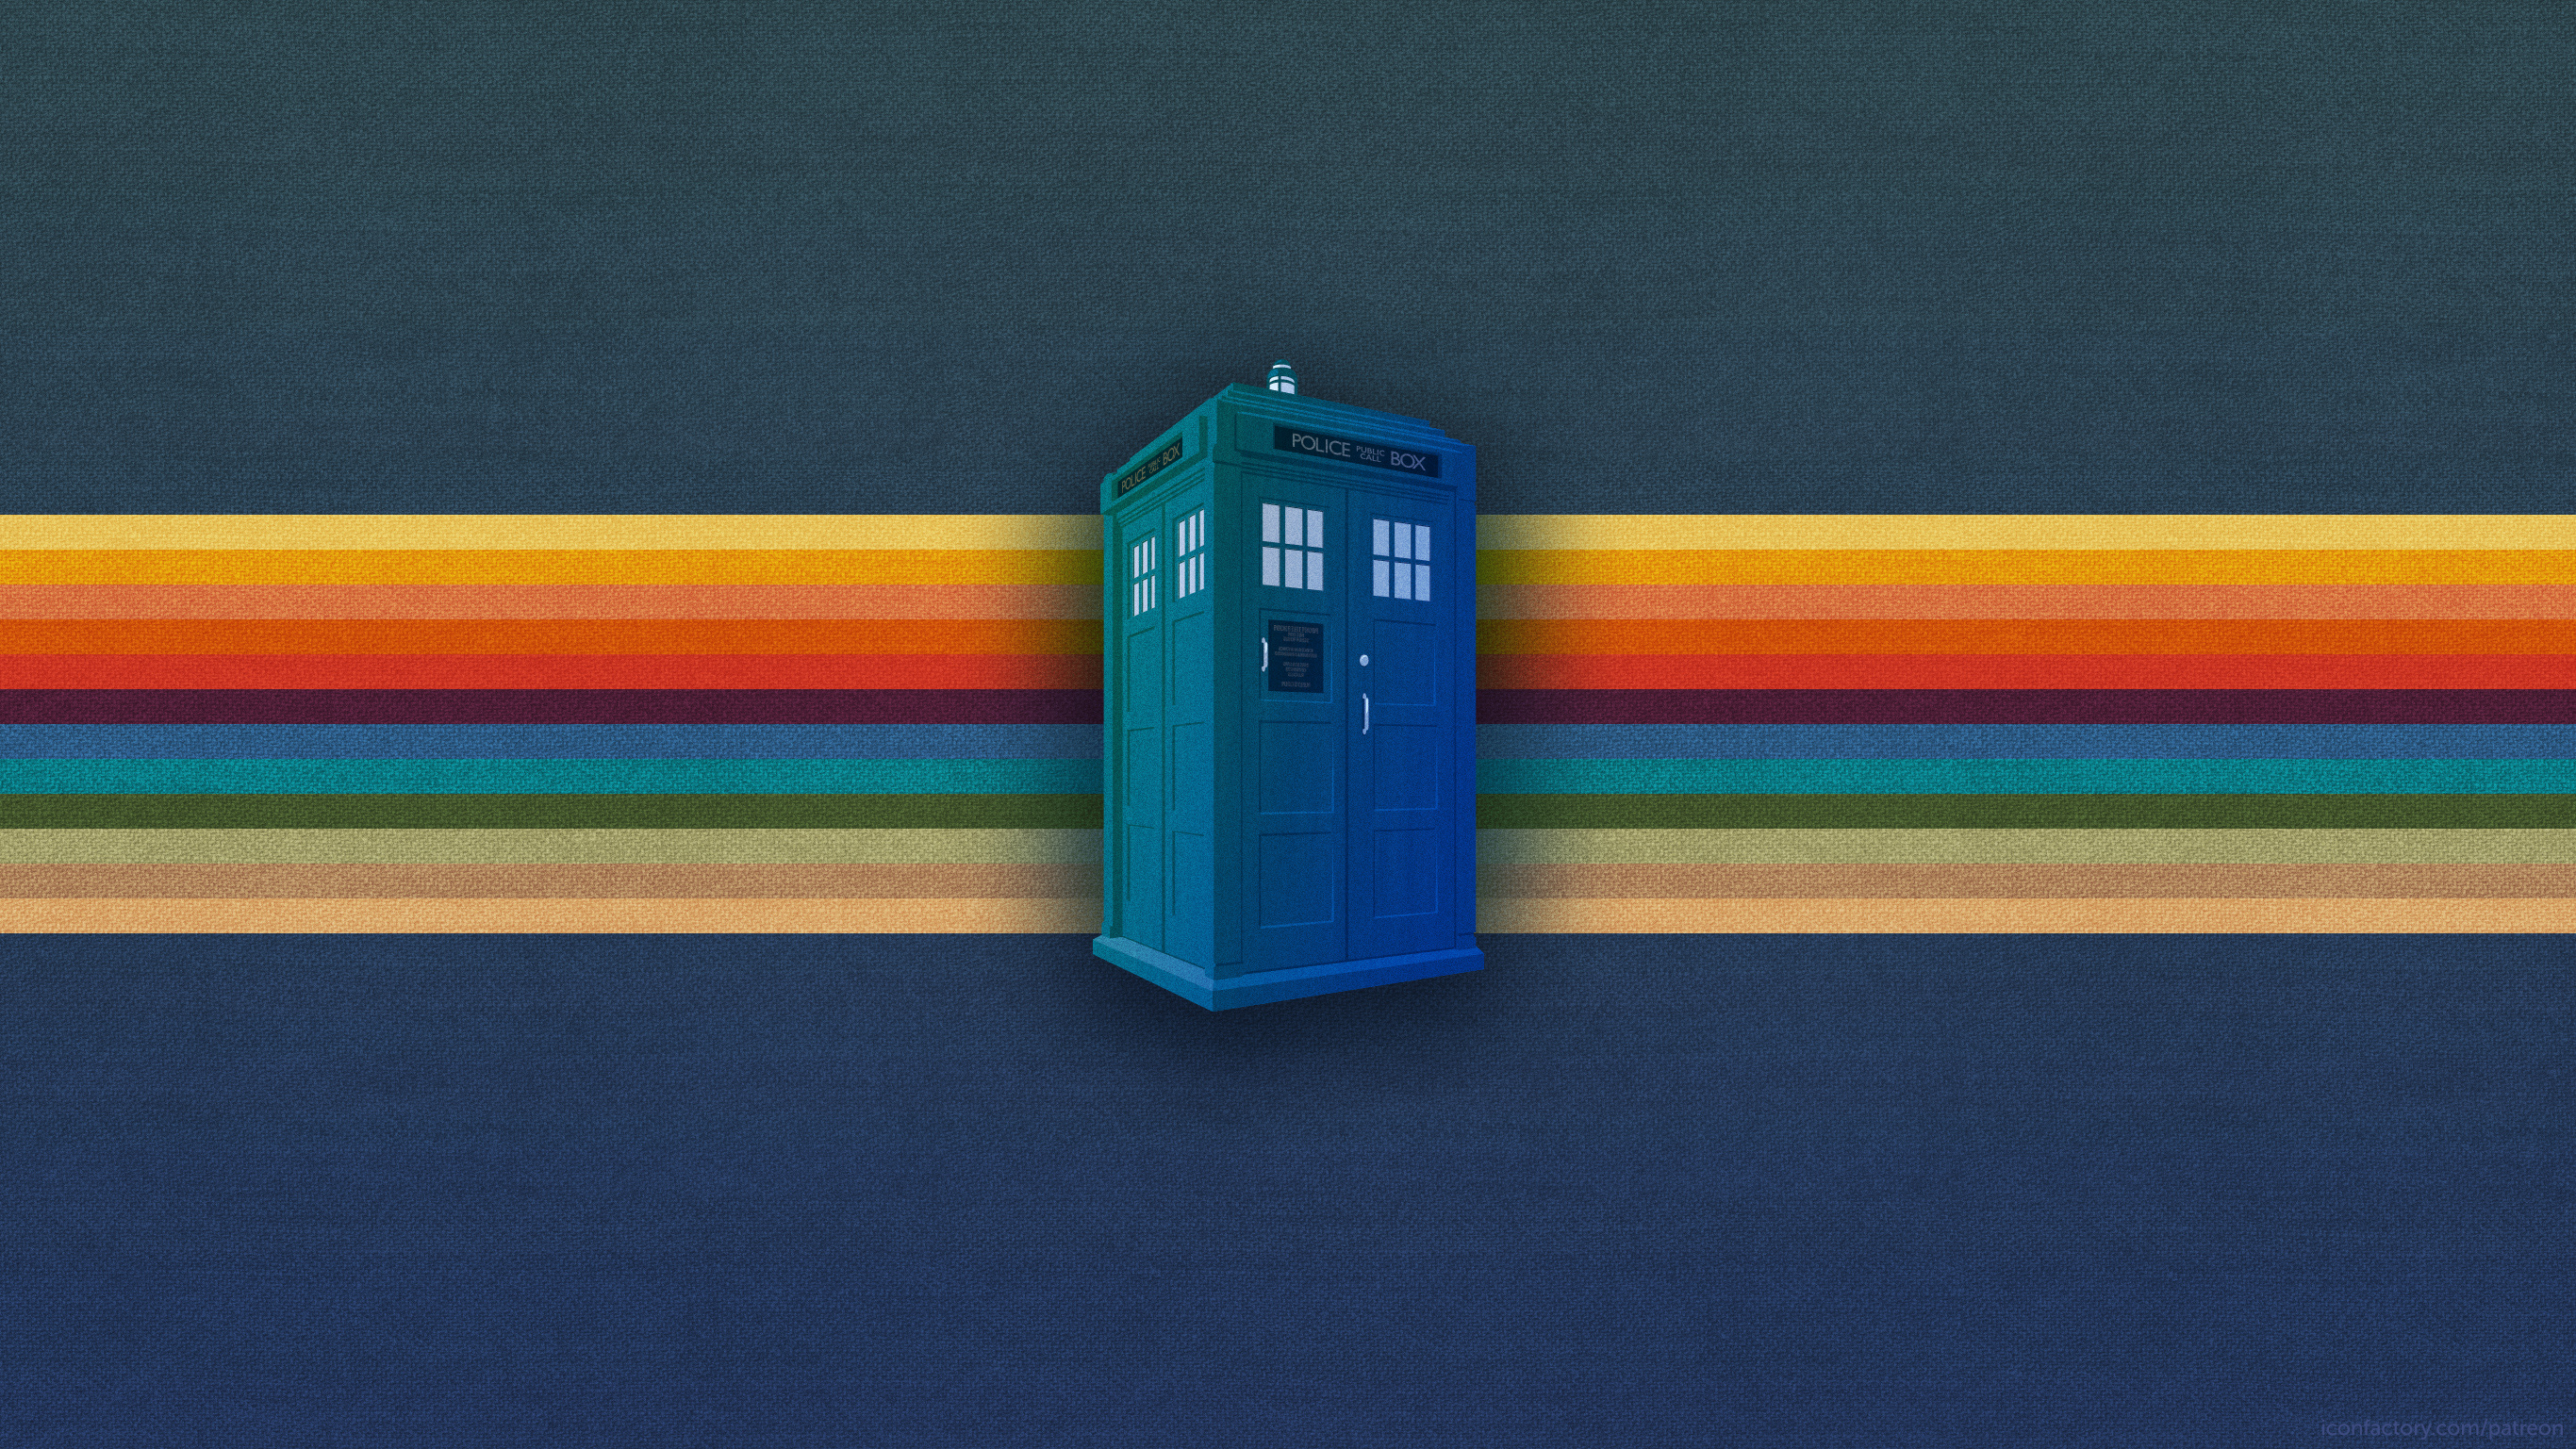 Doctor Who Hd Wallpapers